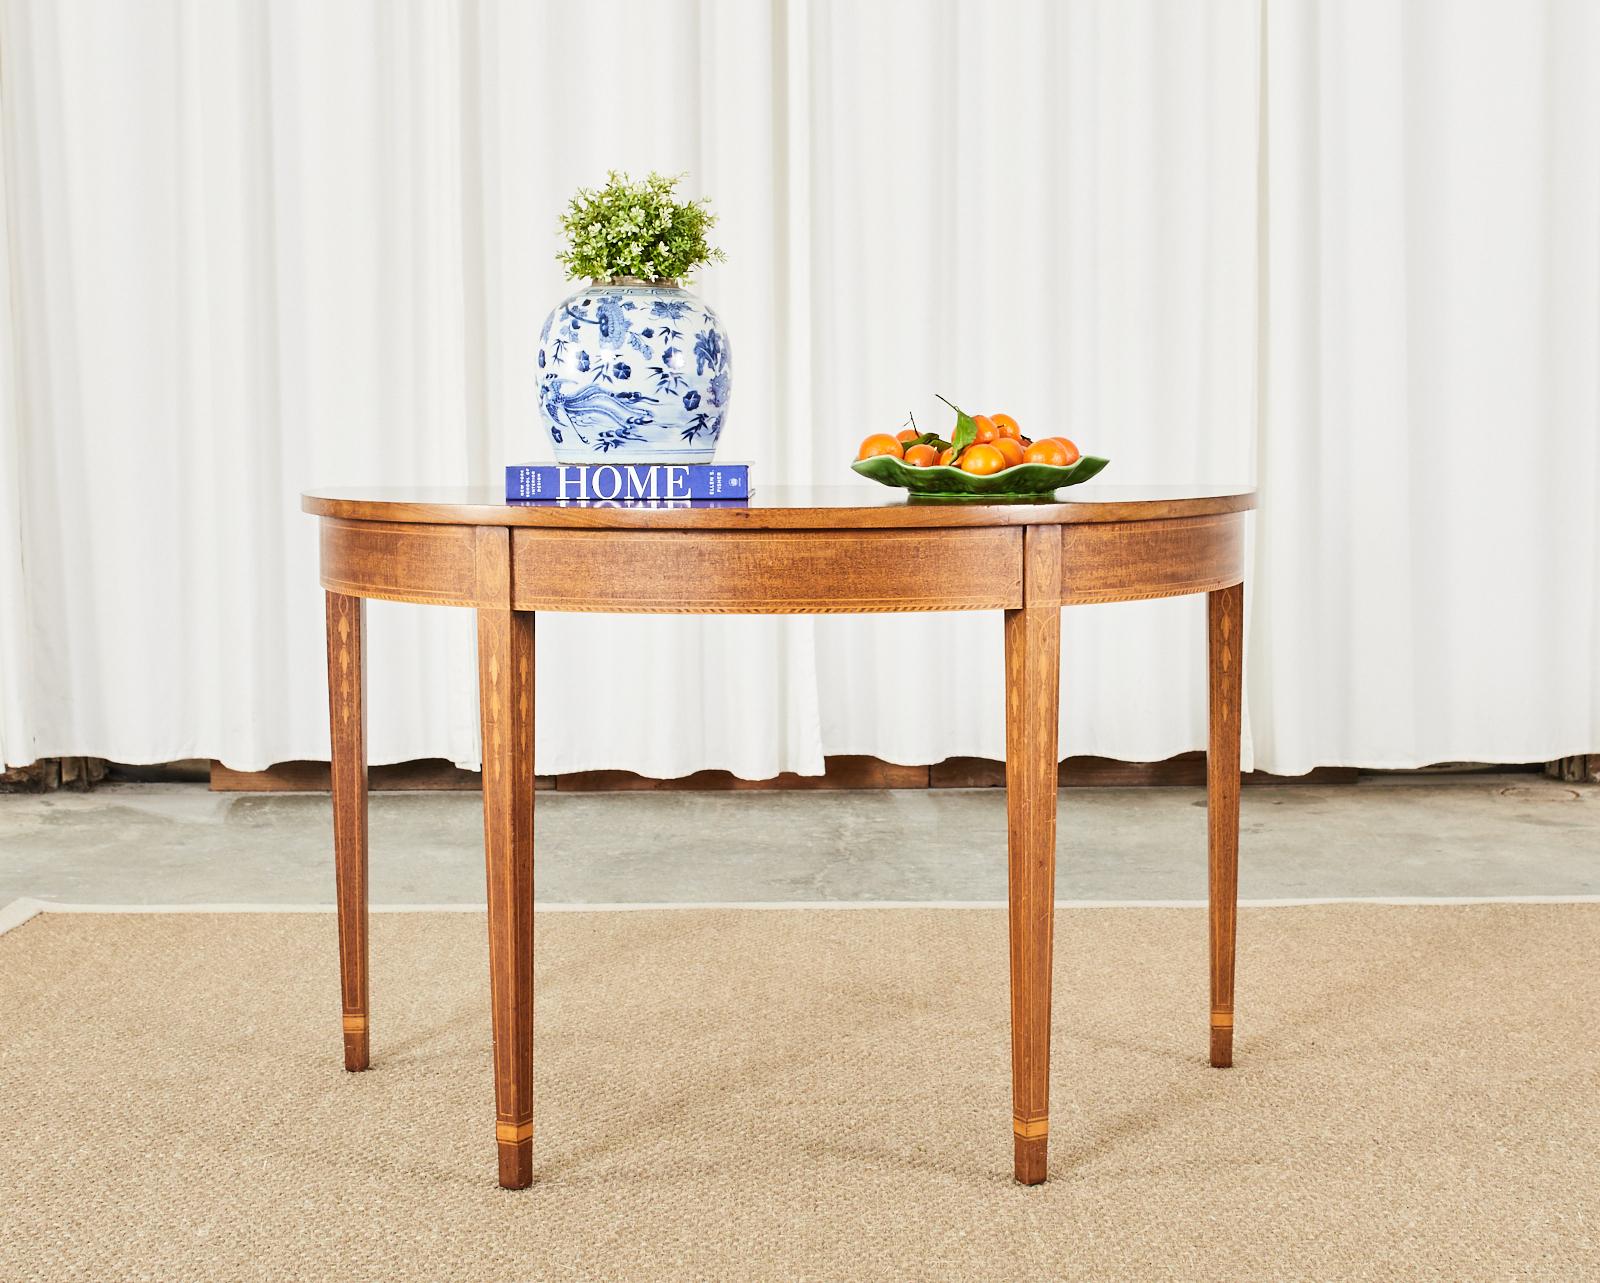 Distinctive pair of mahogany demi-lune tables or console tables crafted in the English Hepplewhite taste. The consoles feature delicate satinwood inlay with thread accents and bell flowers on the frieze and legs. Supported by elegant, tapered legs